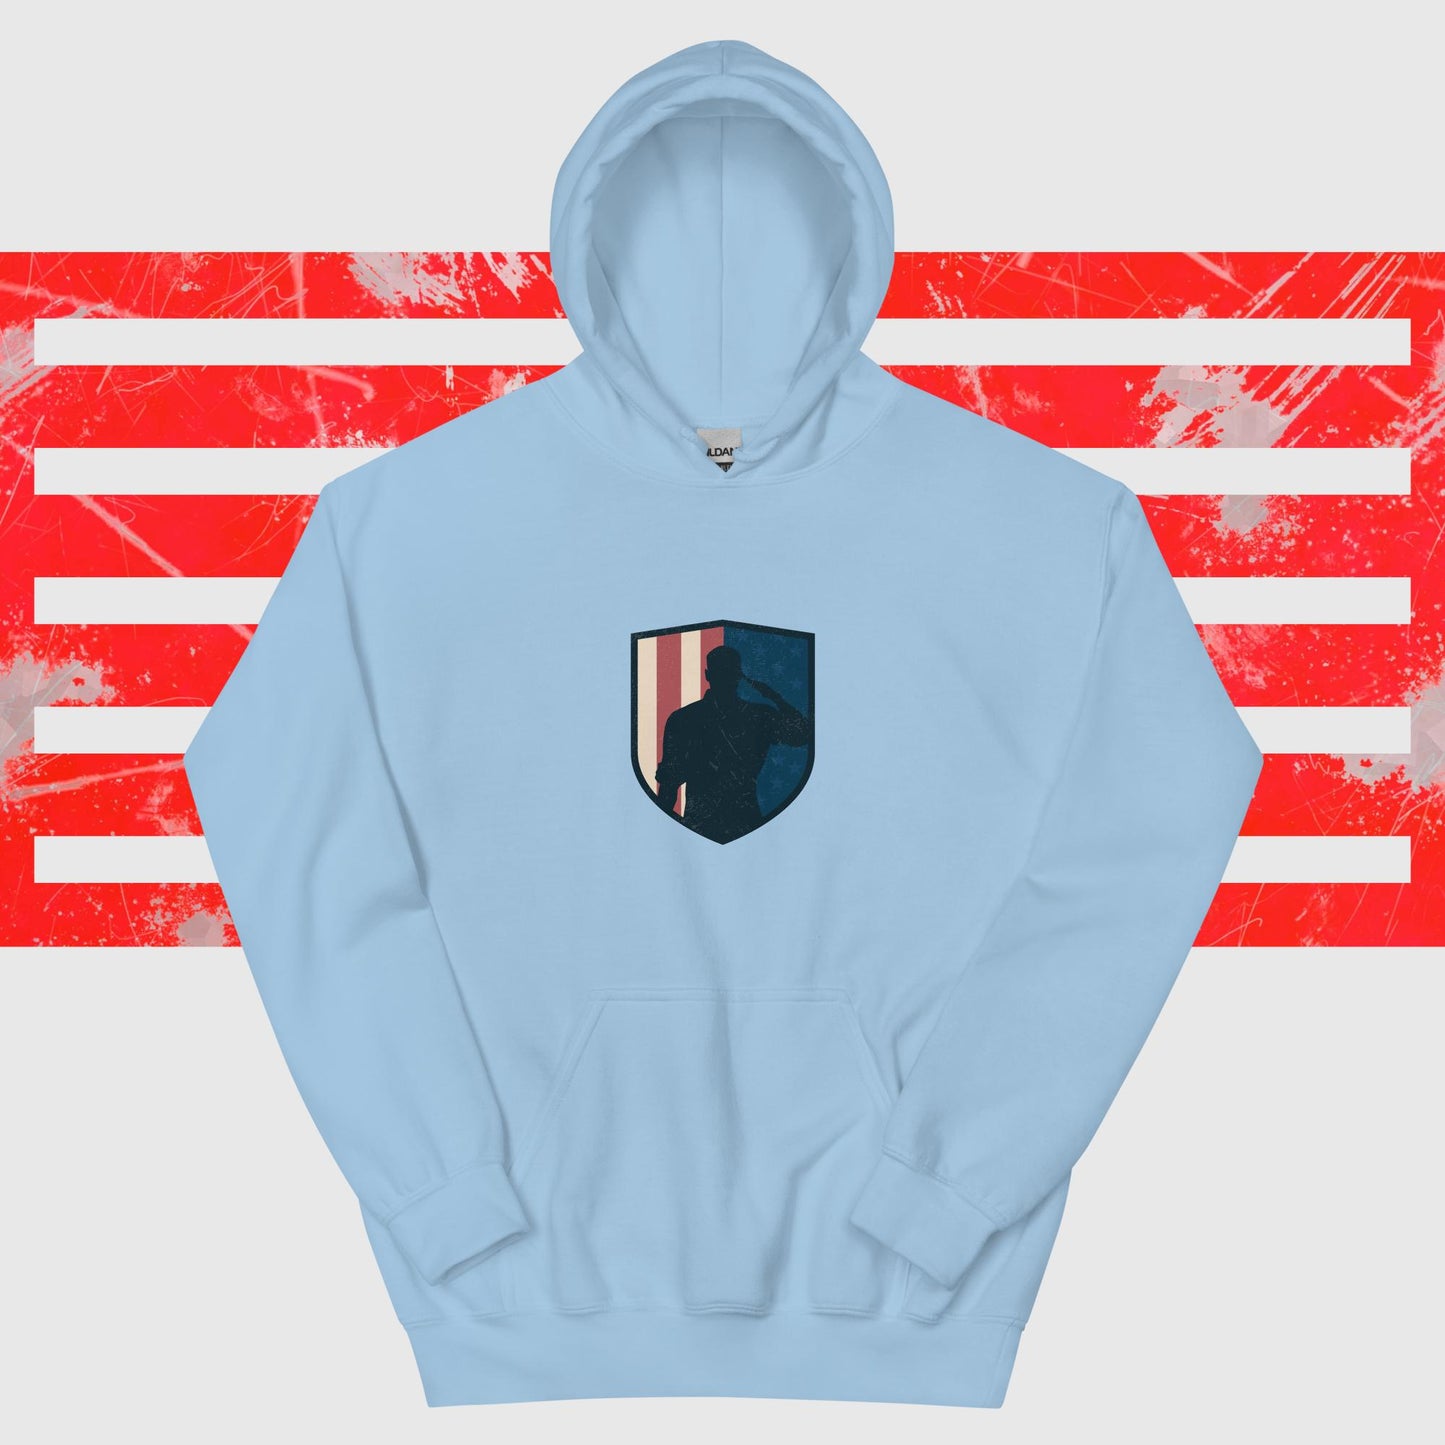 PATRIOTIC HOODIE FOR VETERANS DAY AMERICAN SOLDIER LIGHT BLUE FRONT - www.firstamericanstore.com